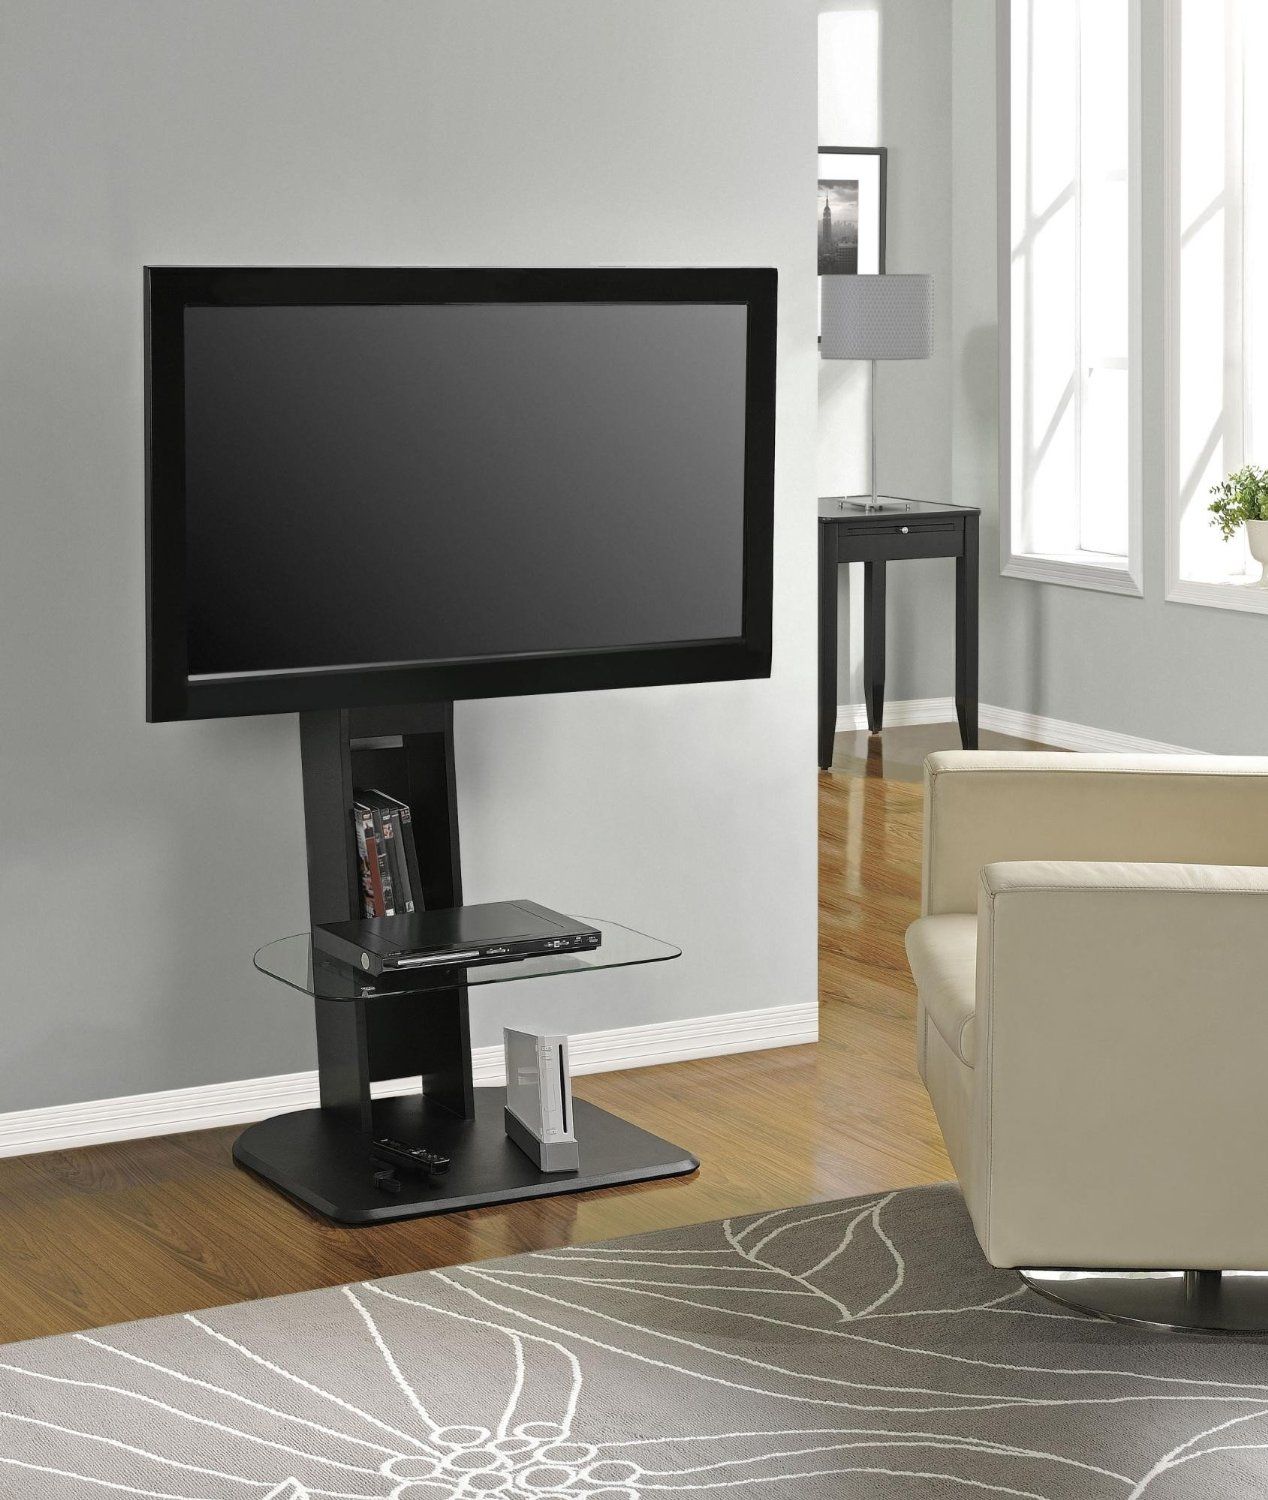 Cool Flat Screen Tv Stands With Mount – Homesfeed With Regard To Unusual Tv Cabinets (Photo 1 of 15)